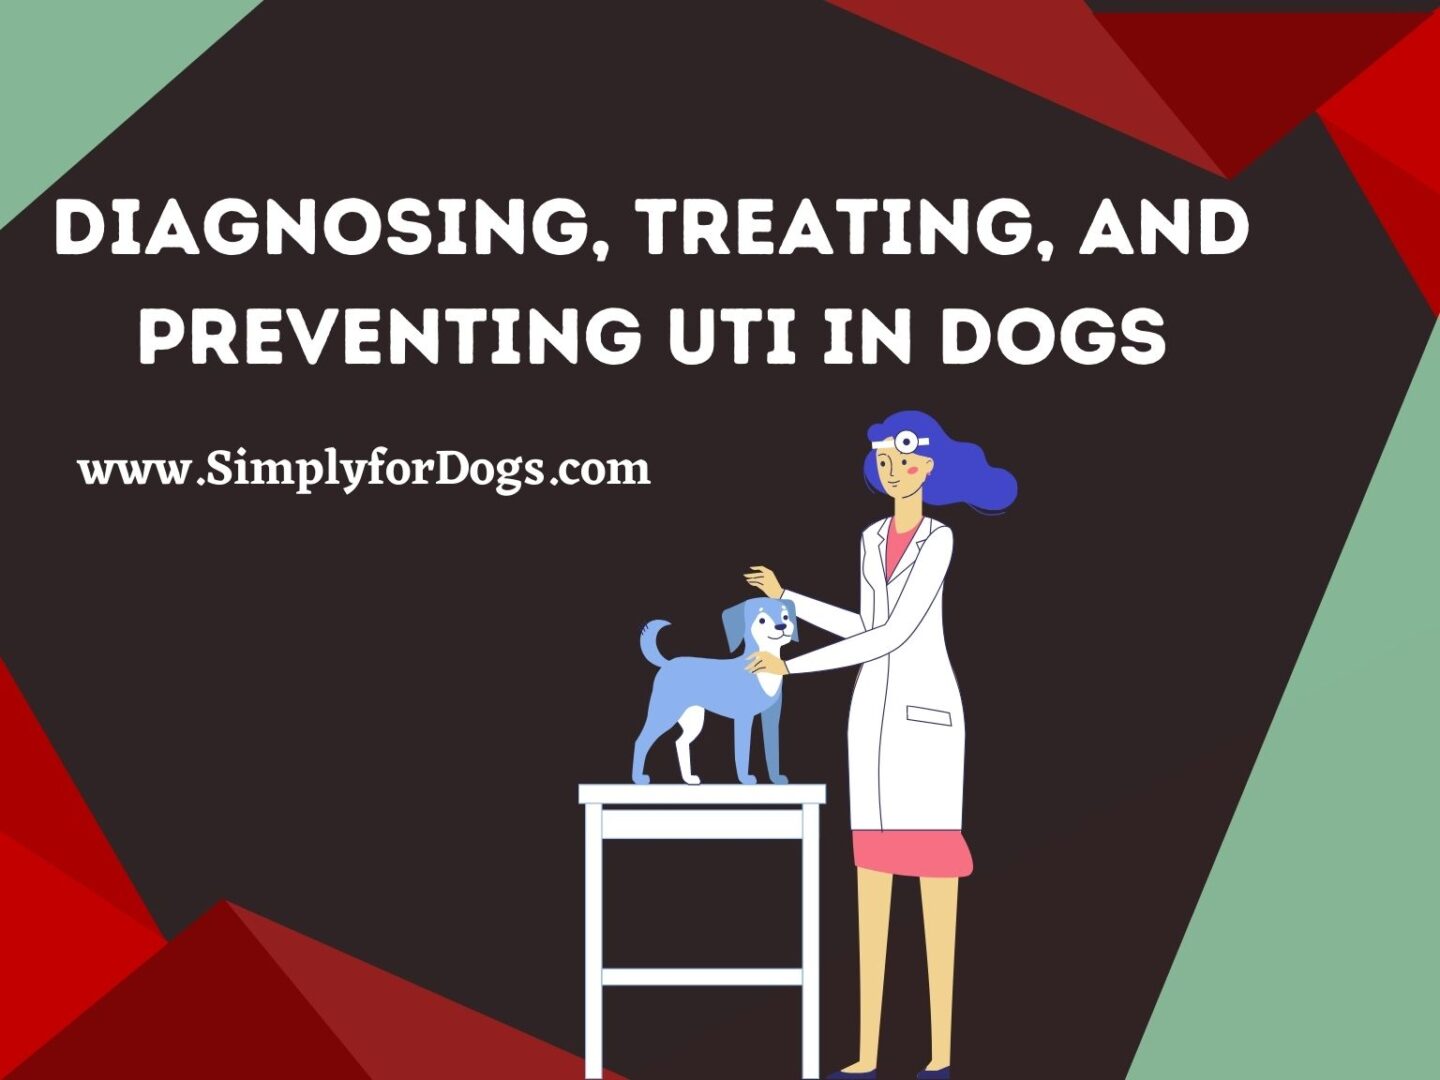 UTI in Dogs (The Clinical Approach) - Simply For Dogs